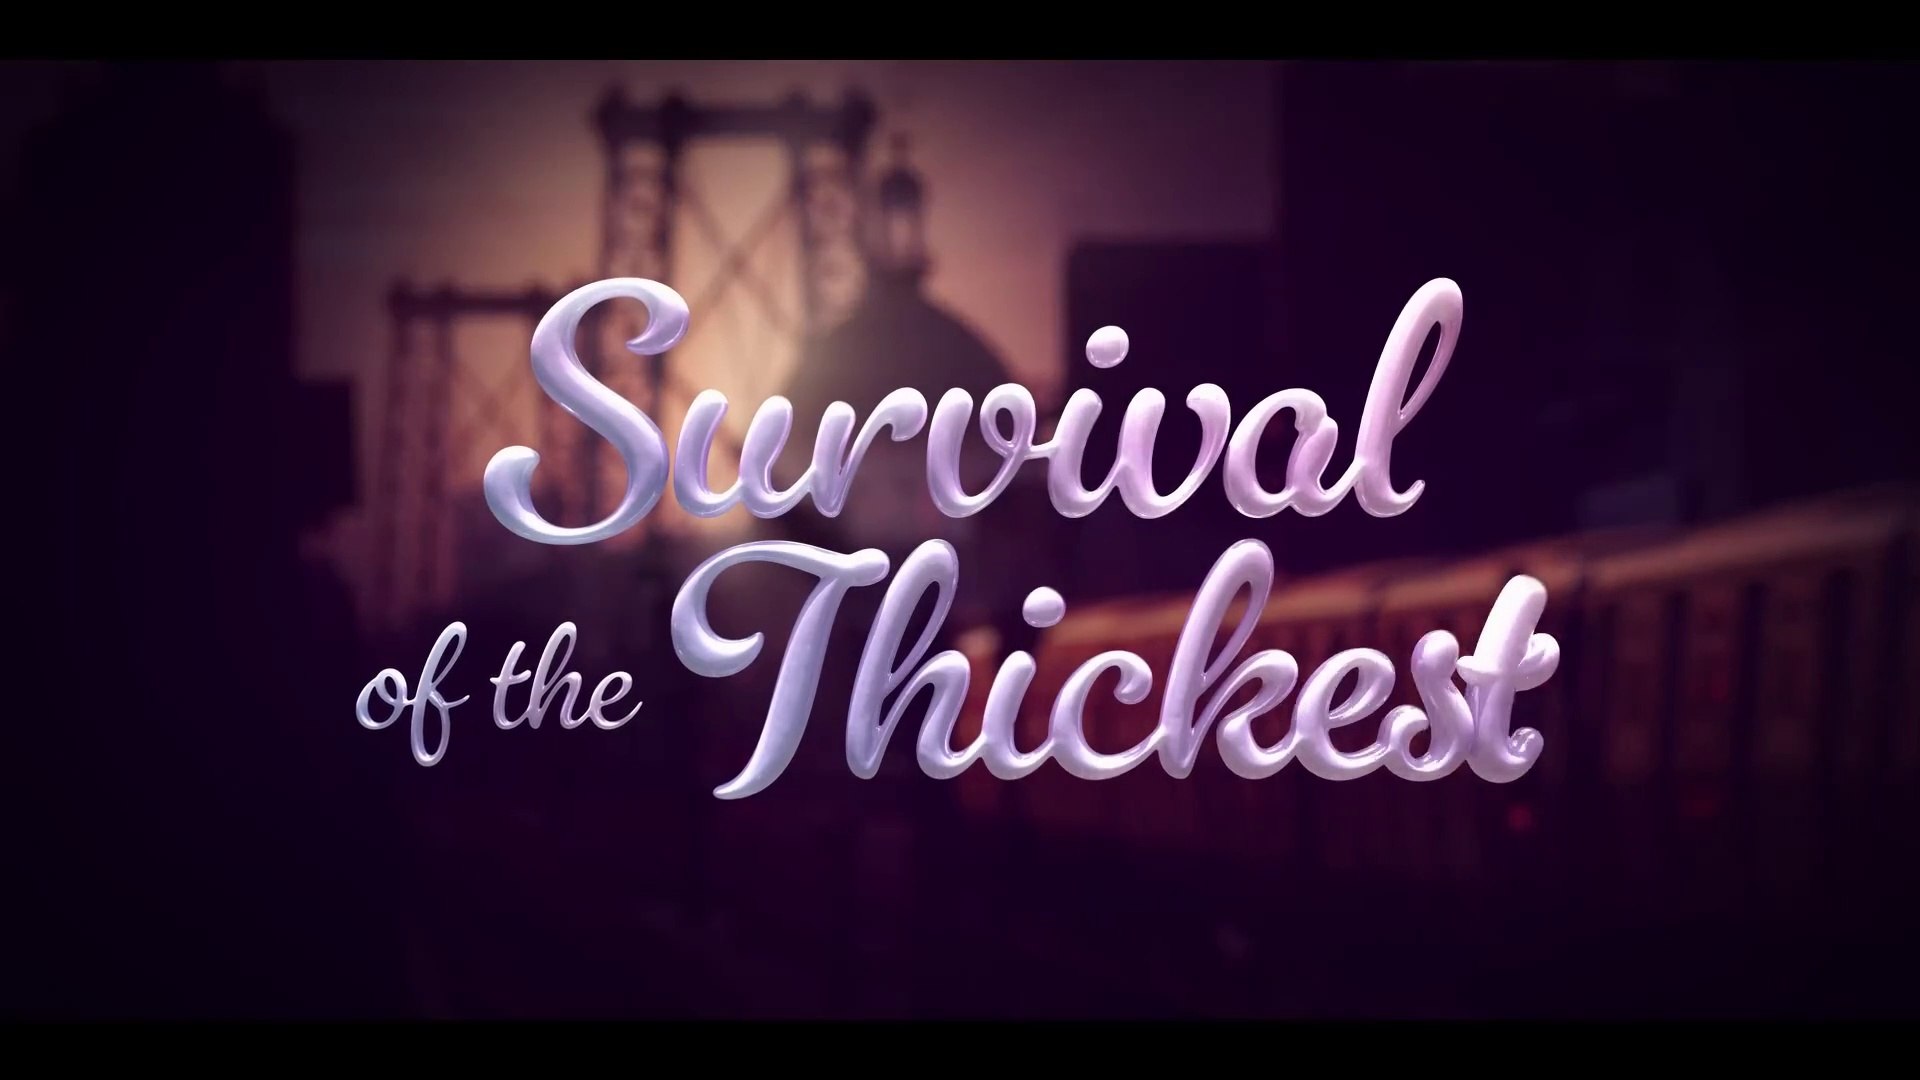 Peppermint steals the show in trailer for Survival of the Thickest